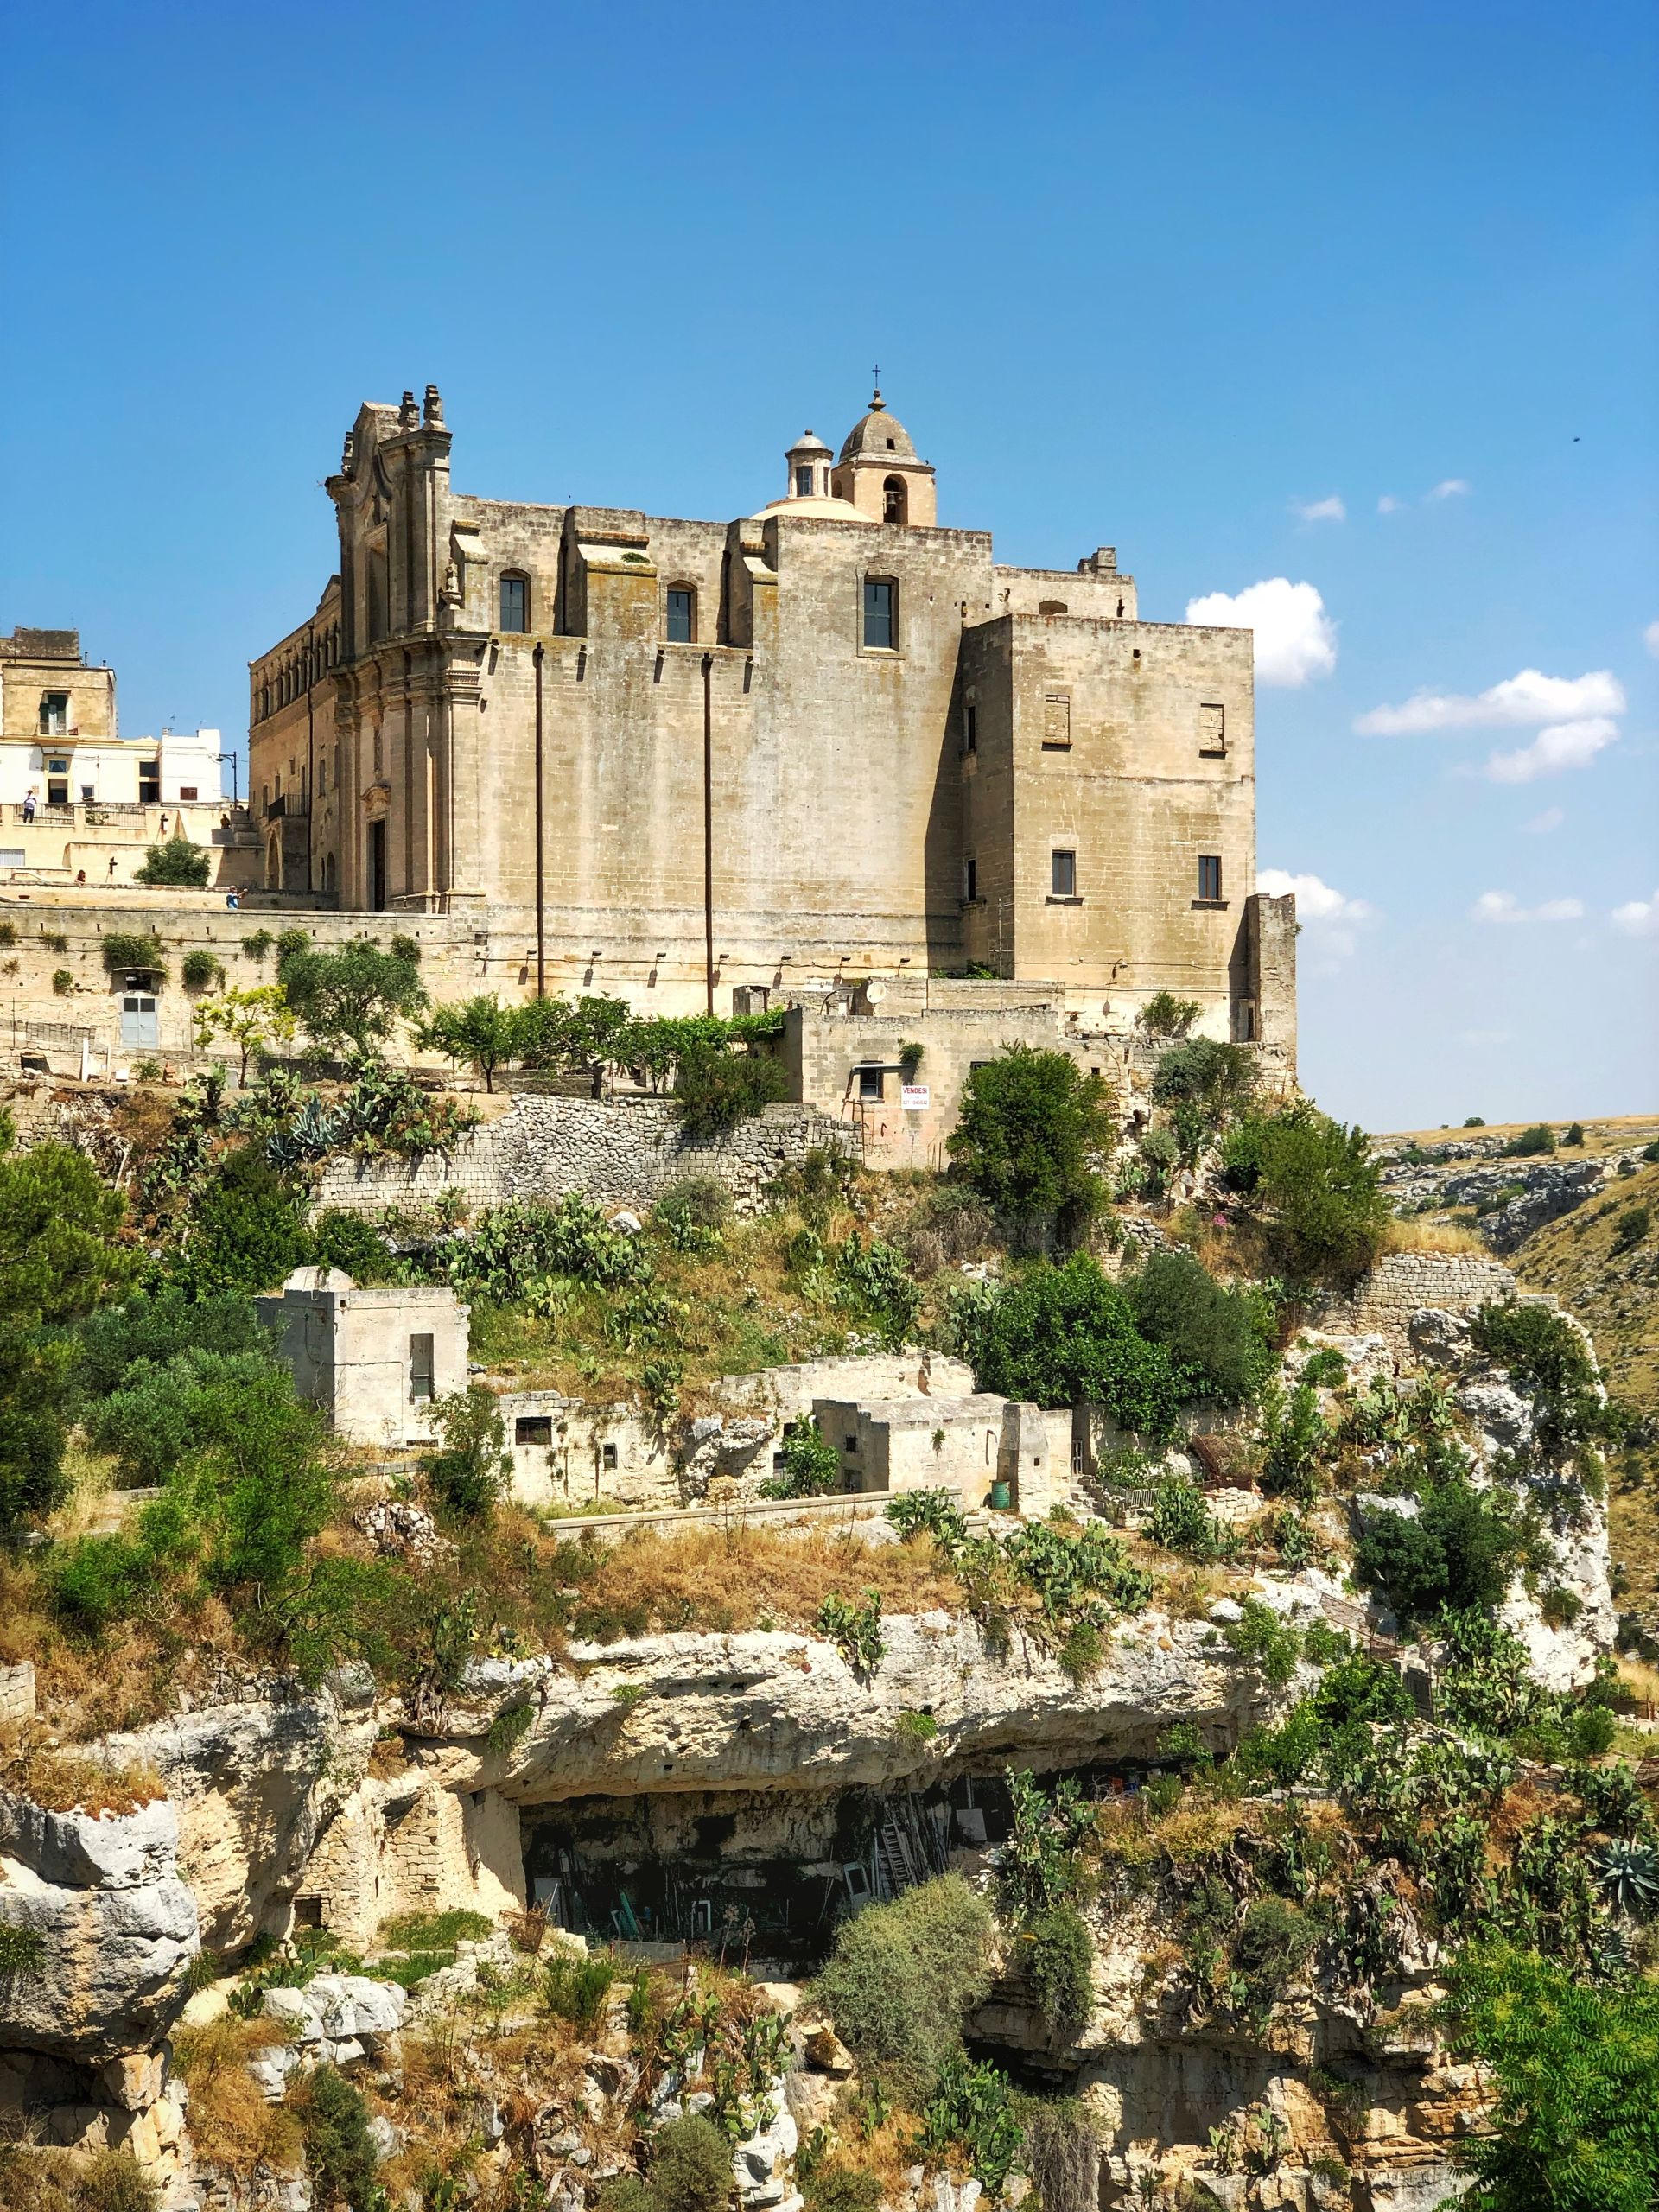 The Matera Cathedral